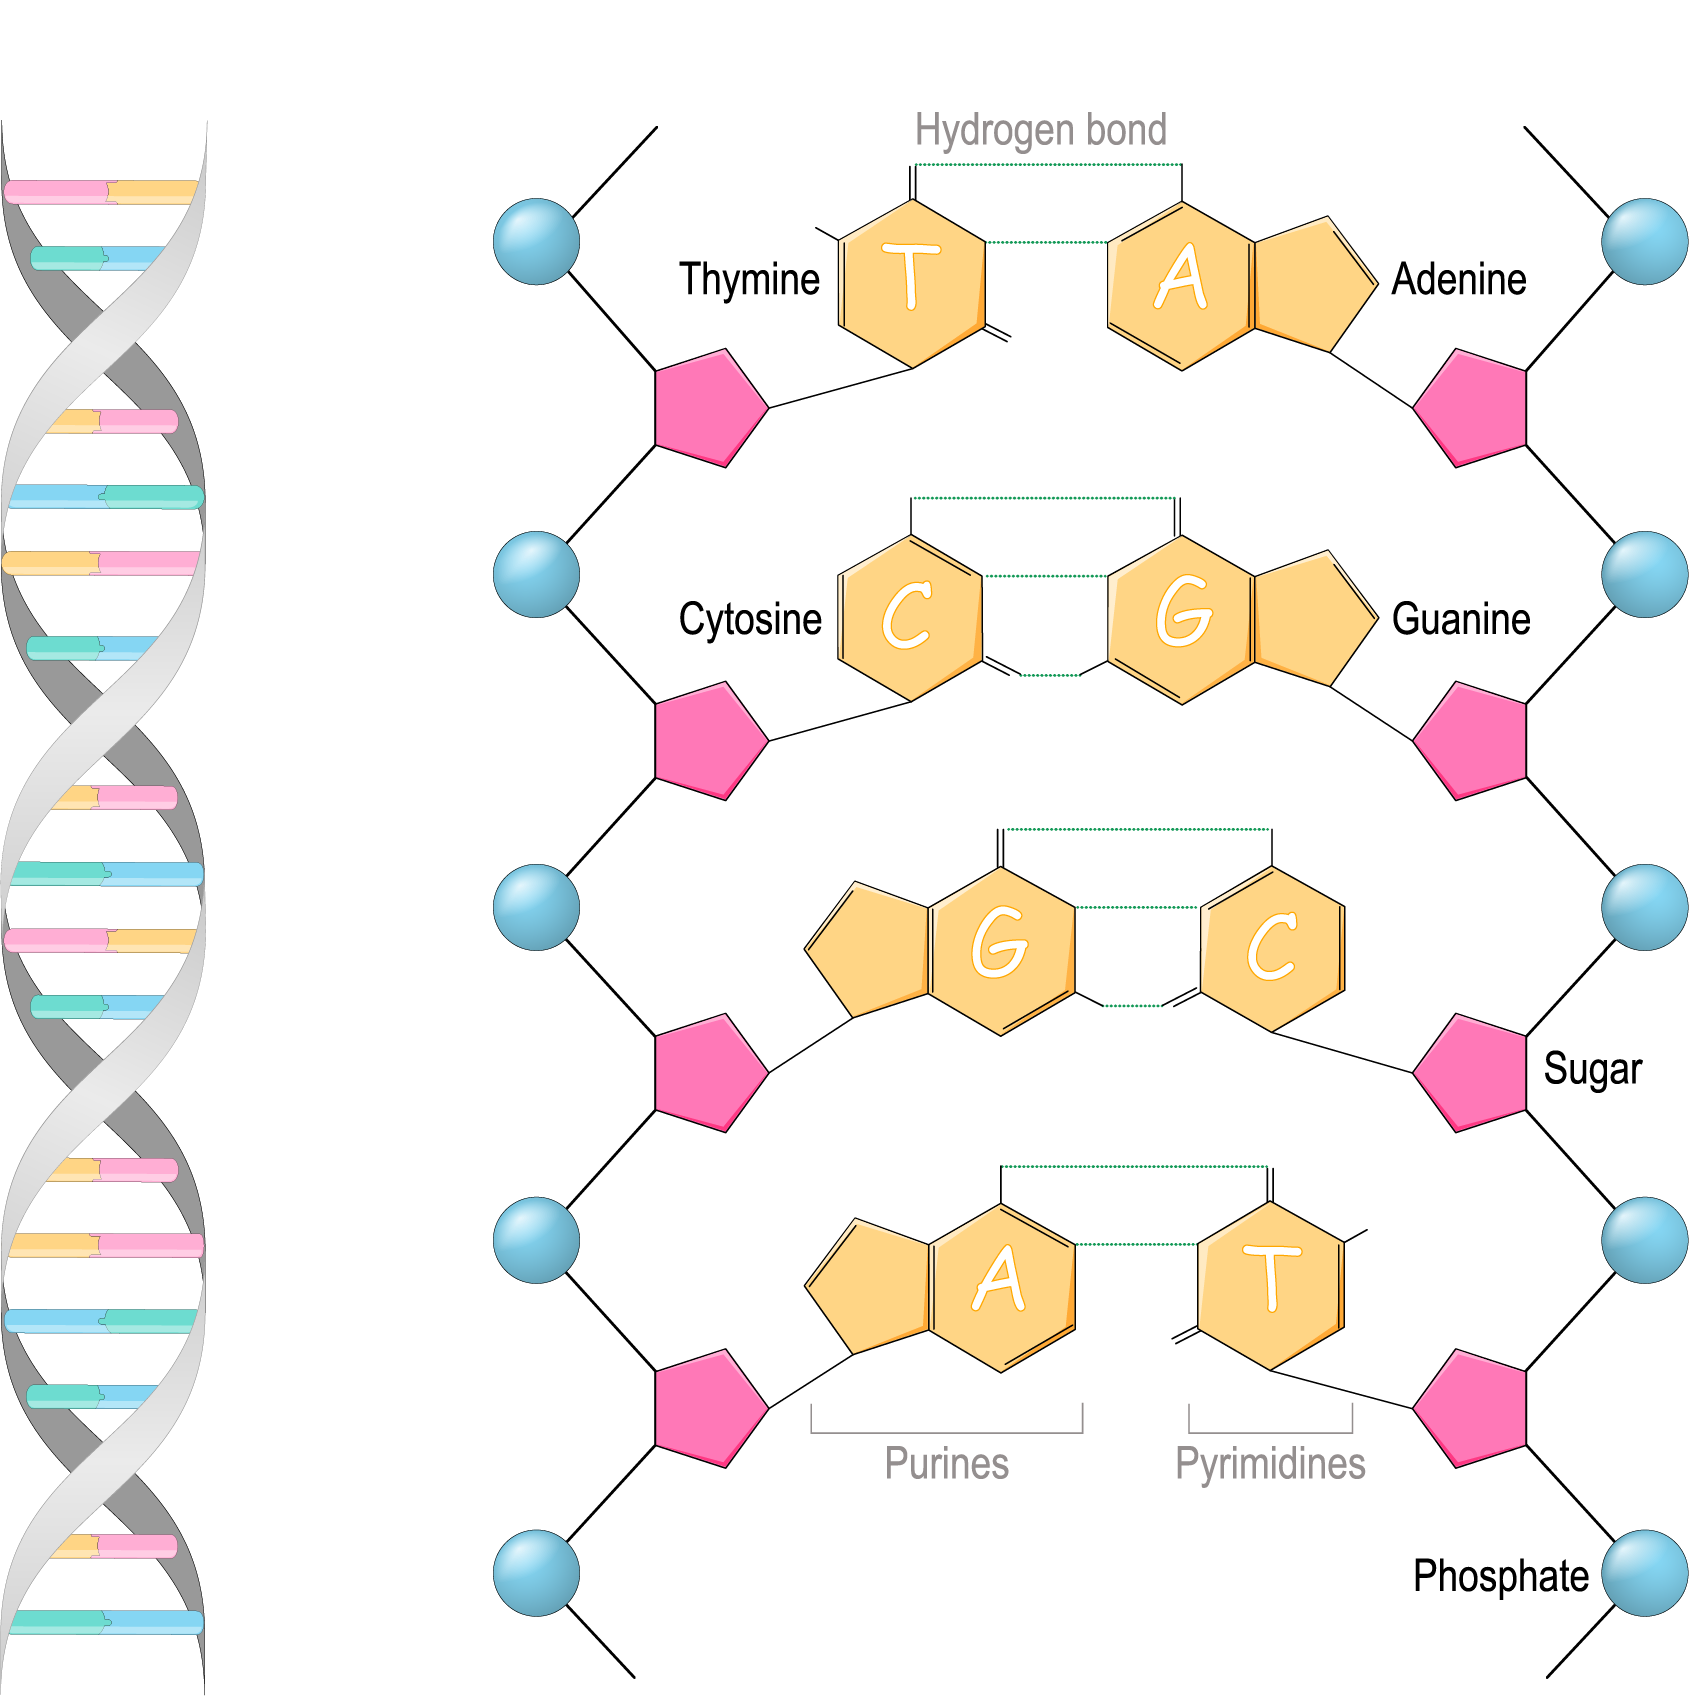 Illustration of the location and structure of DNA double helix highlighting components that hold the gene specificity of every living being.